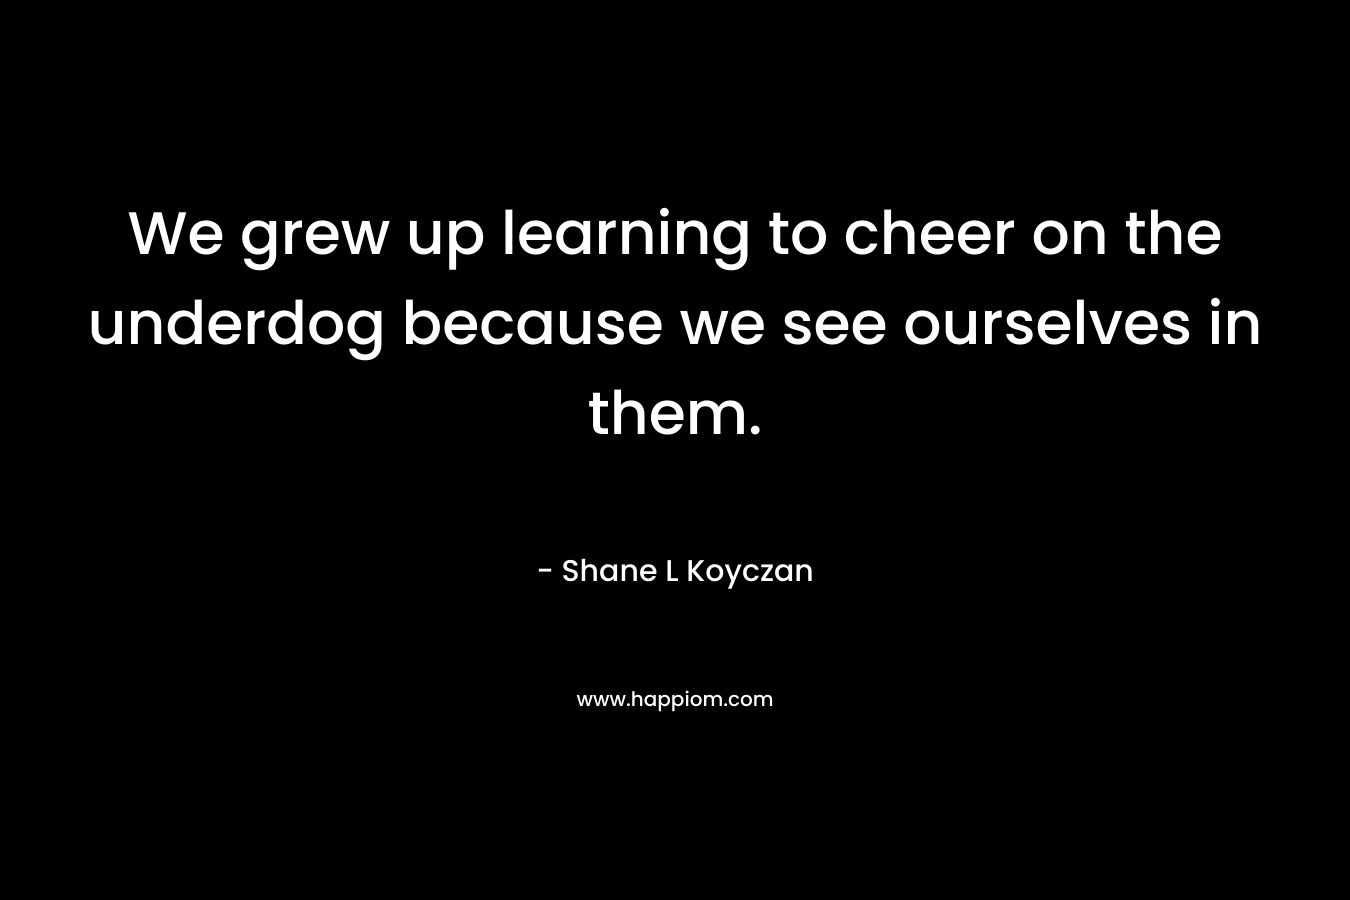 We grew up learning to cheer on the underdog because we see ourselves in them. – Shane L Koyczan